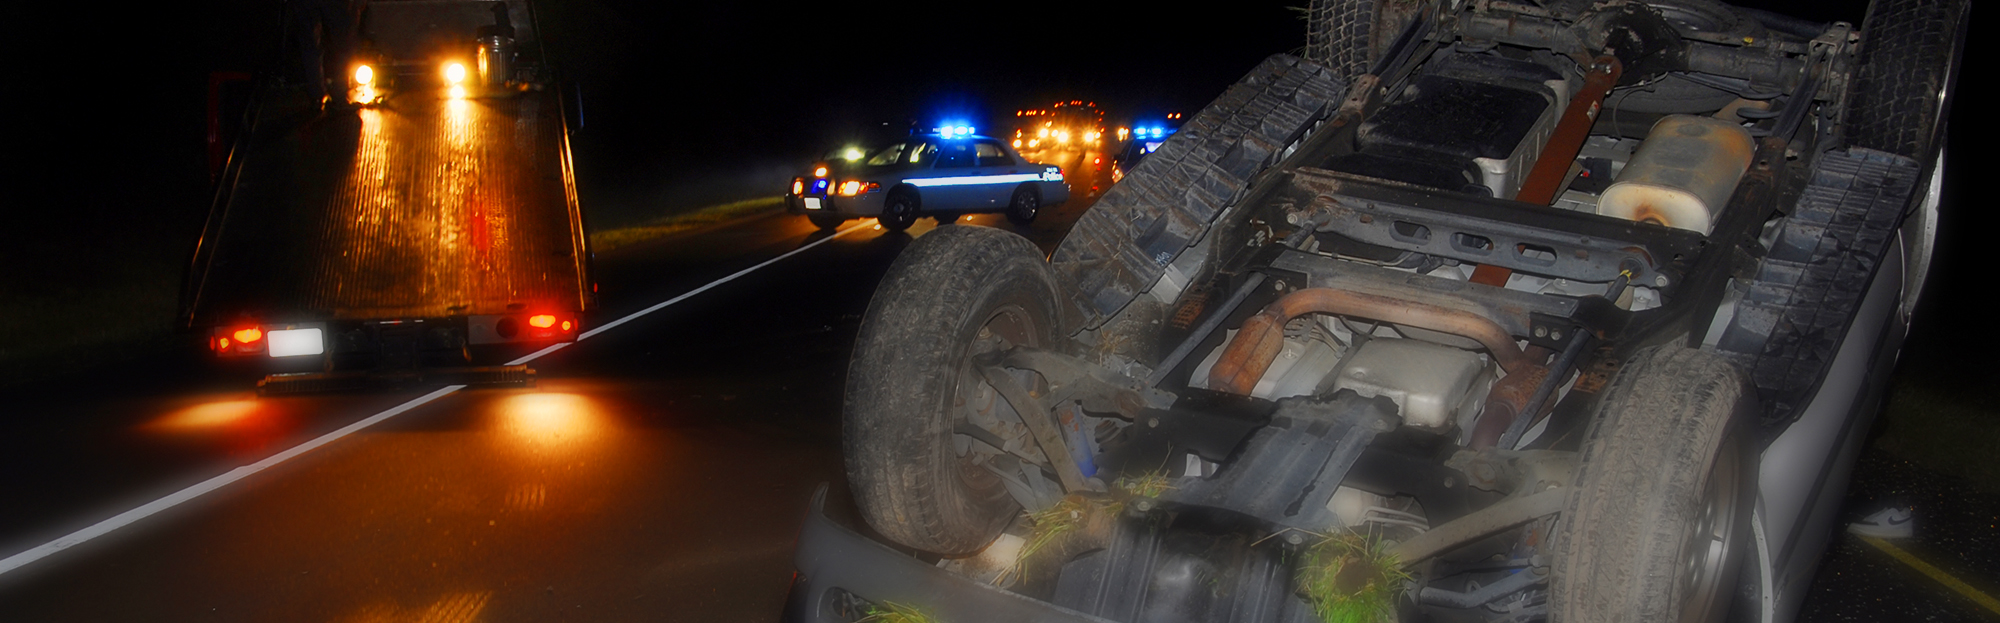 Fatal rollover accident on freeway.